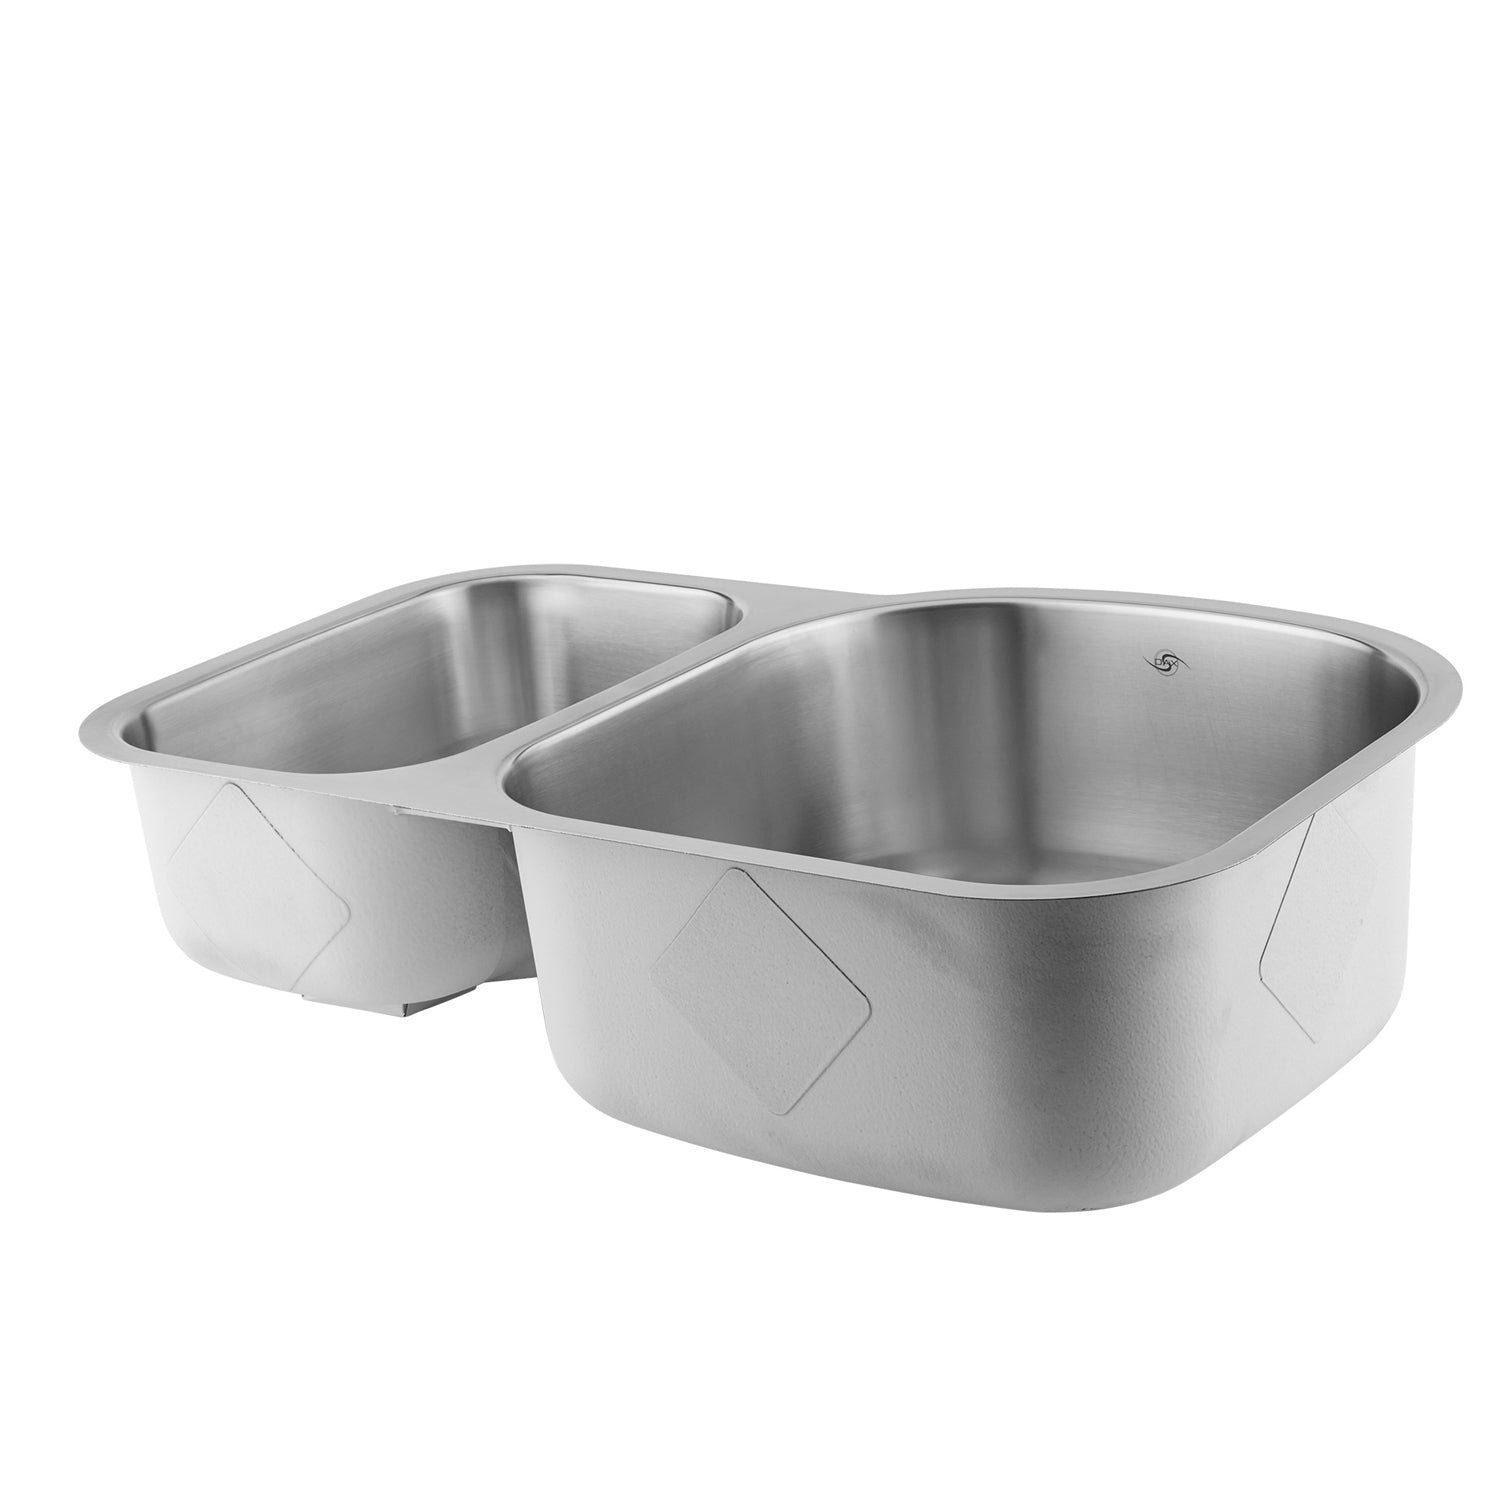 DAX 30/70 Double Bowl Undermount Kitchen Sink, 18 Gauge Stainless Steel, Brushed Finish , 31-1/2 x 20-1/2 x 9 Inches (DAX-3121R)